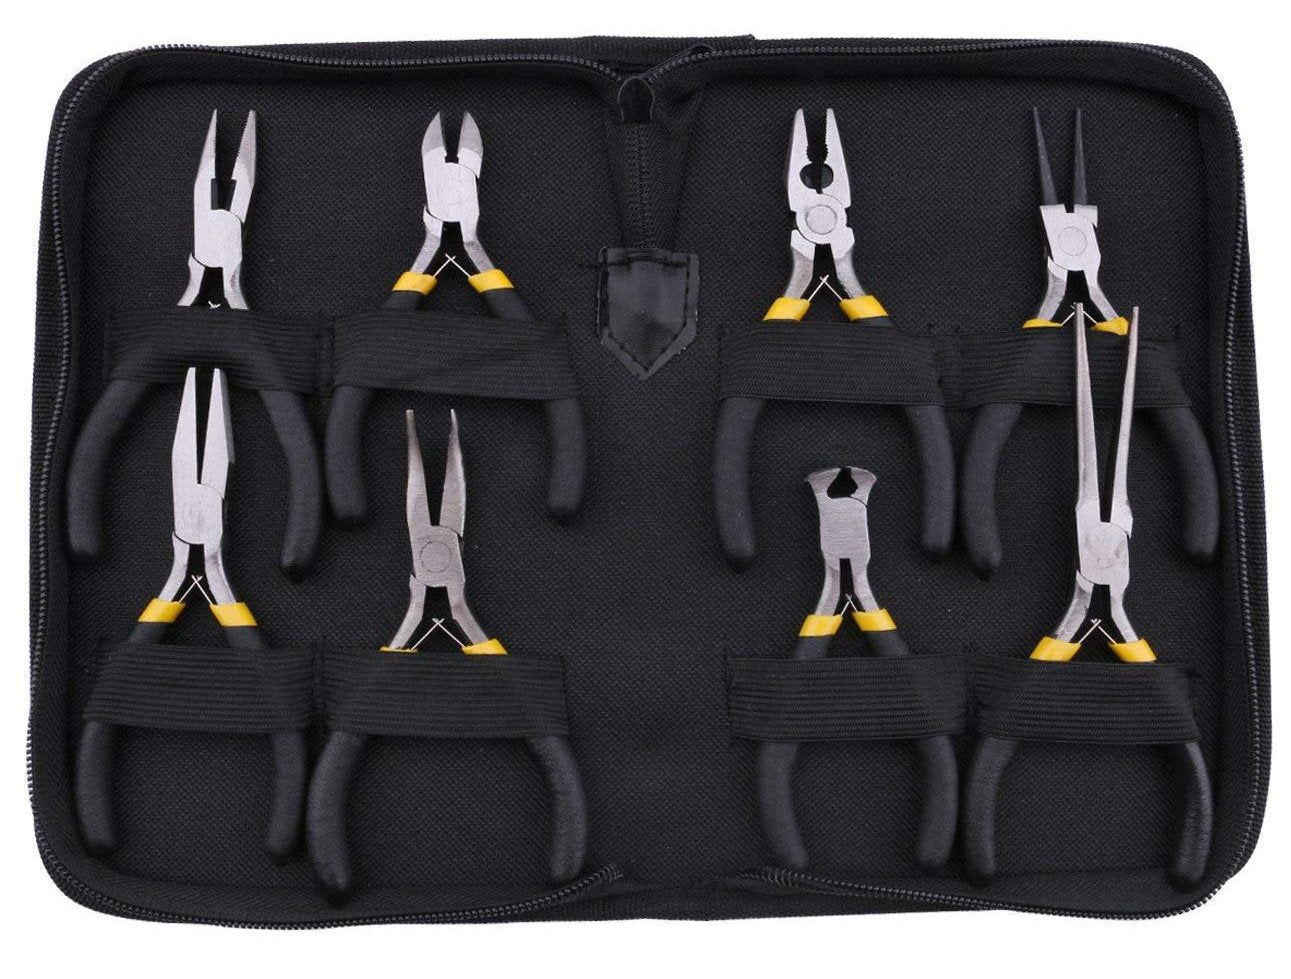 Cutters and Pliers from PMD Way with free delivery worldwide